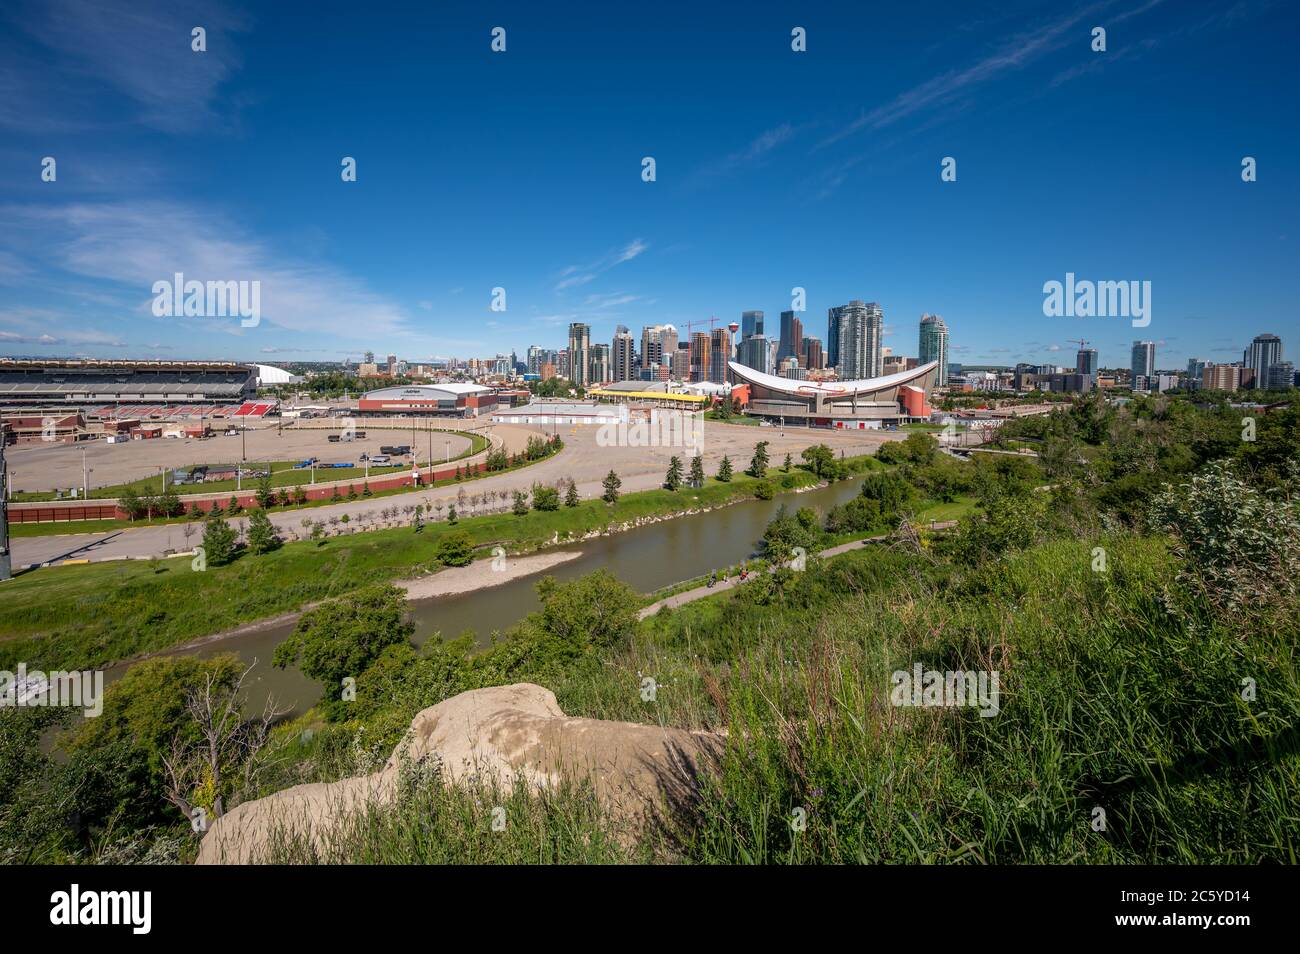 Calgary, Alberta - July 5, 2020: Calgary's Scotiabank Saddledome and the downtown skyline. The Saddledome is scheduled to be replaced in the near futu Stock Photo